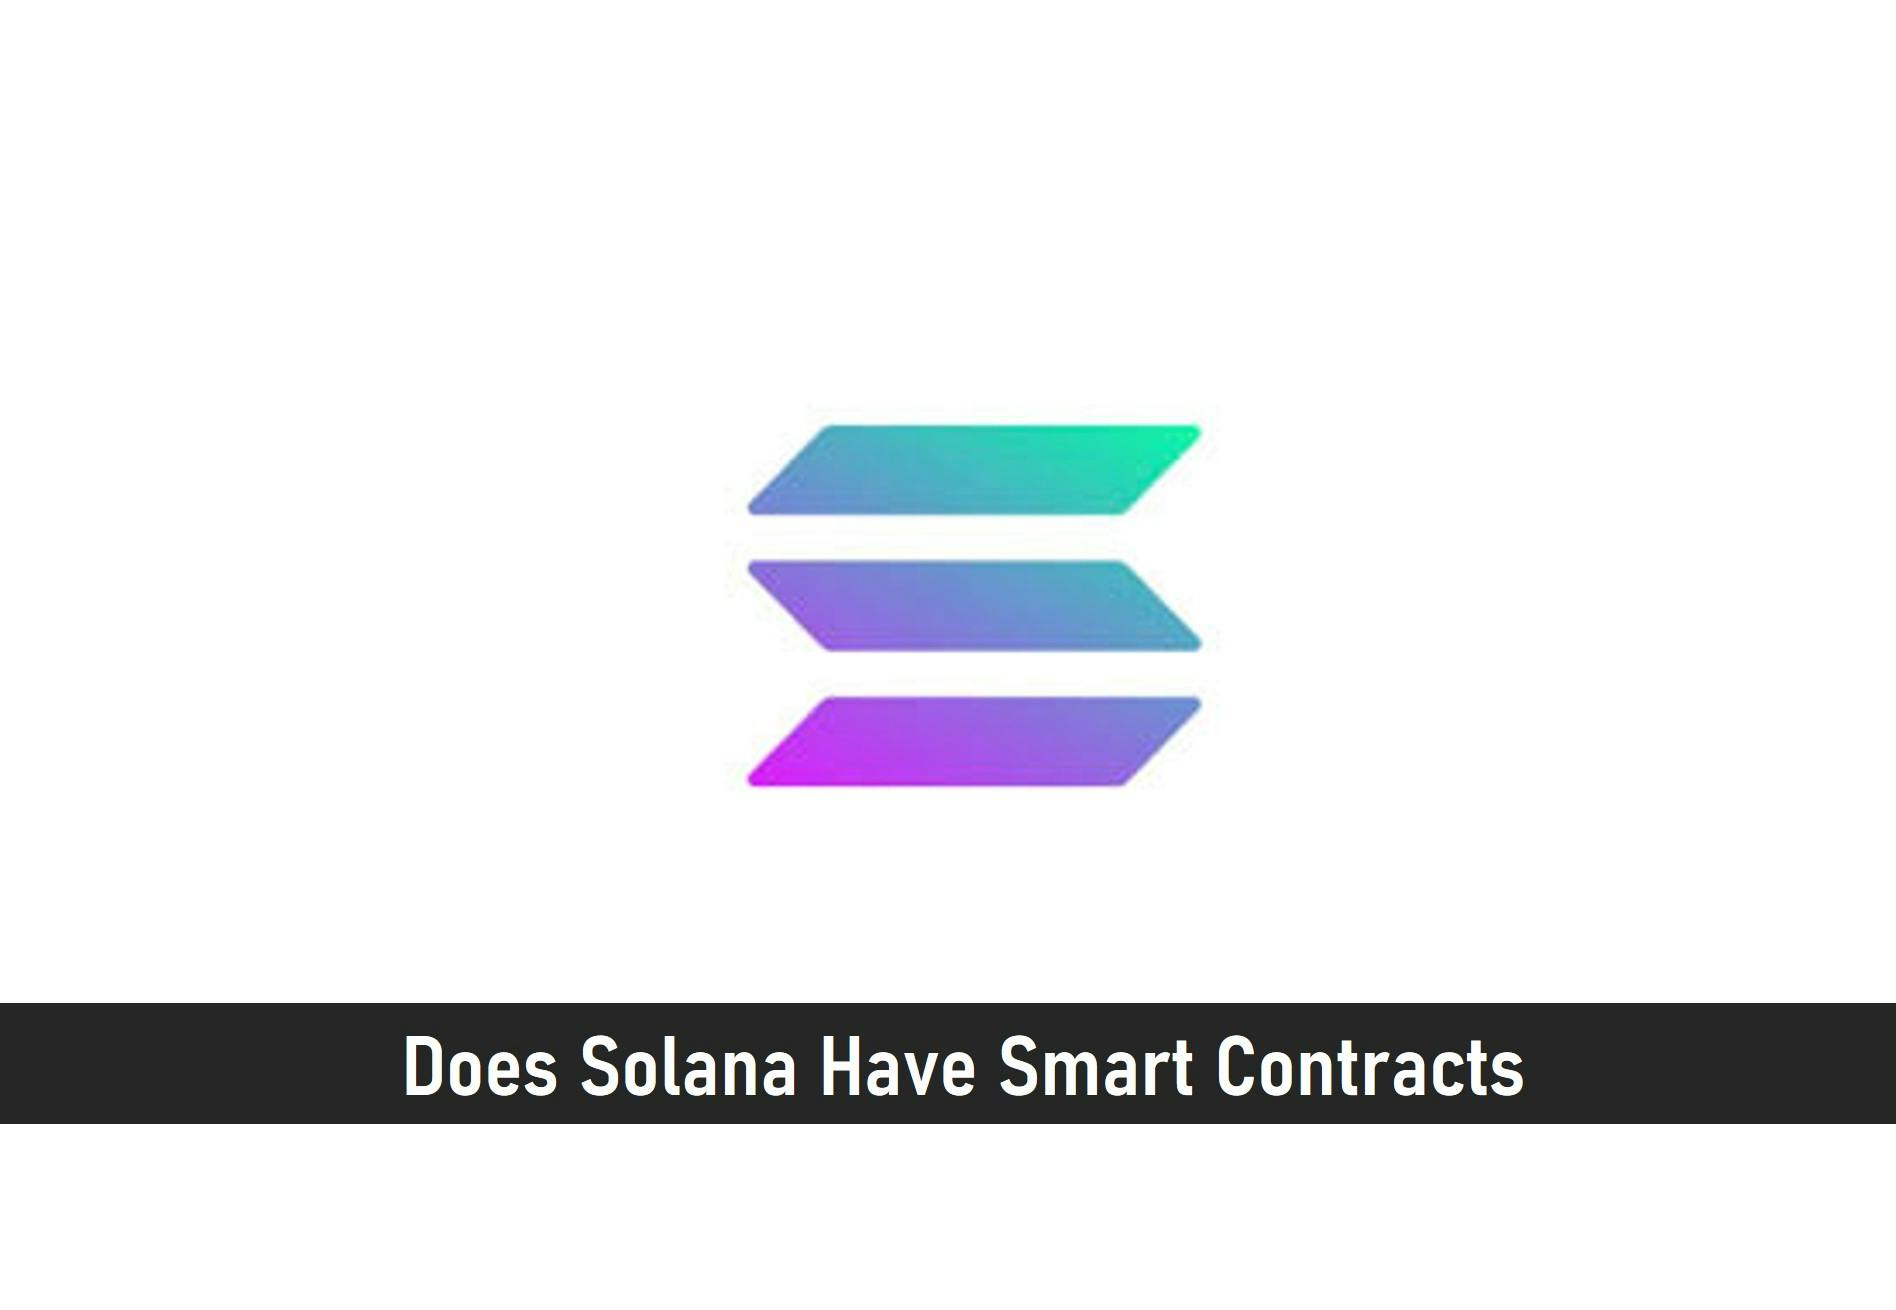 Does Solana Have Smart Contracts?